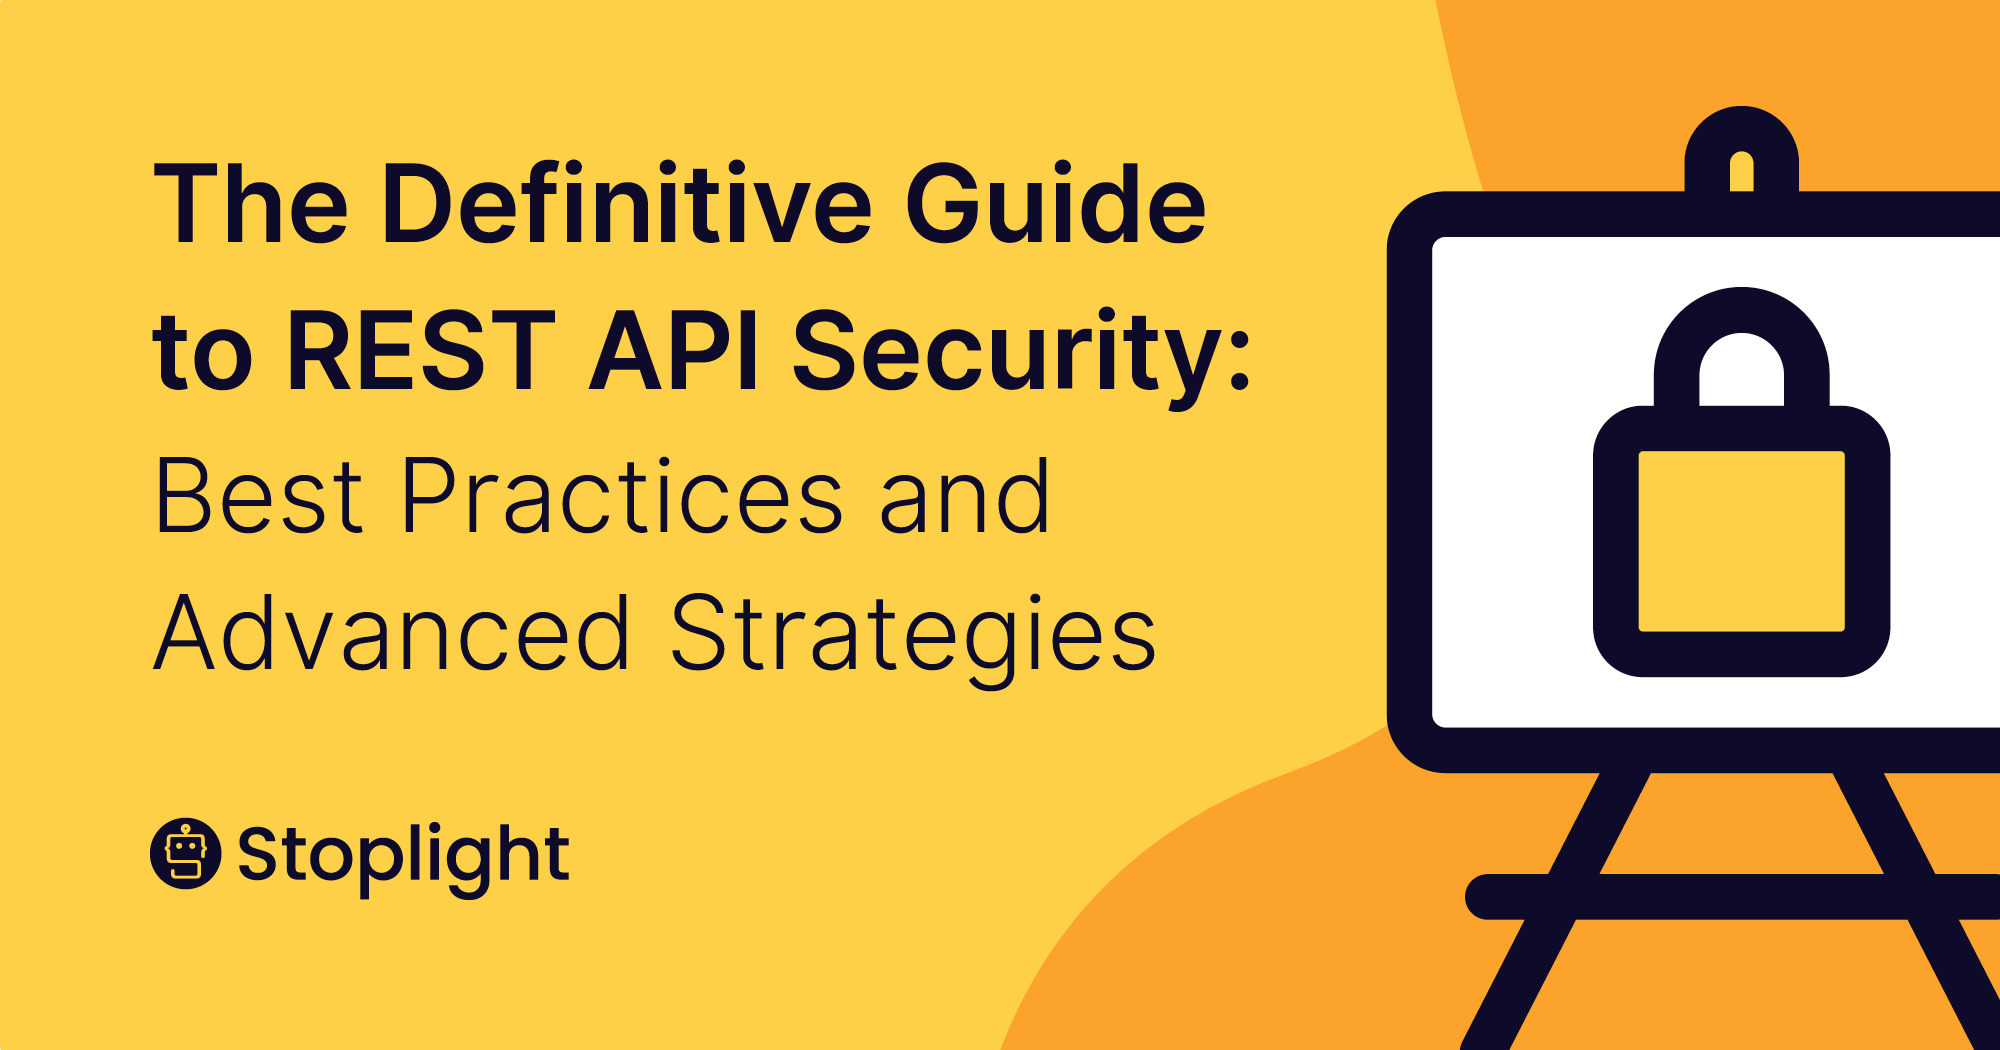 The Definitive Guide to REST API Security: Best Practices